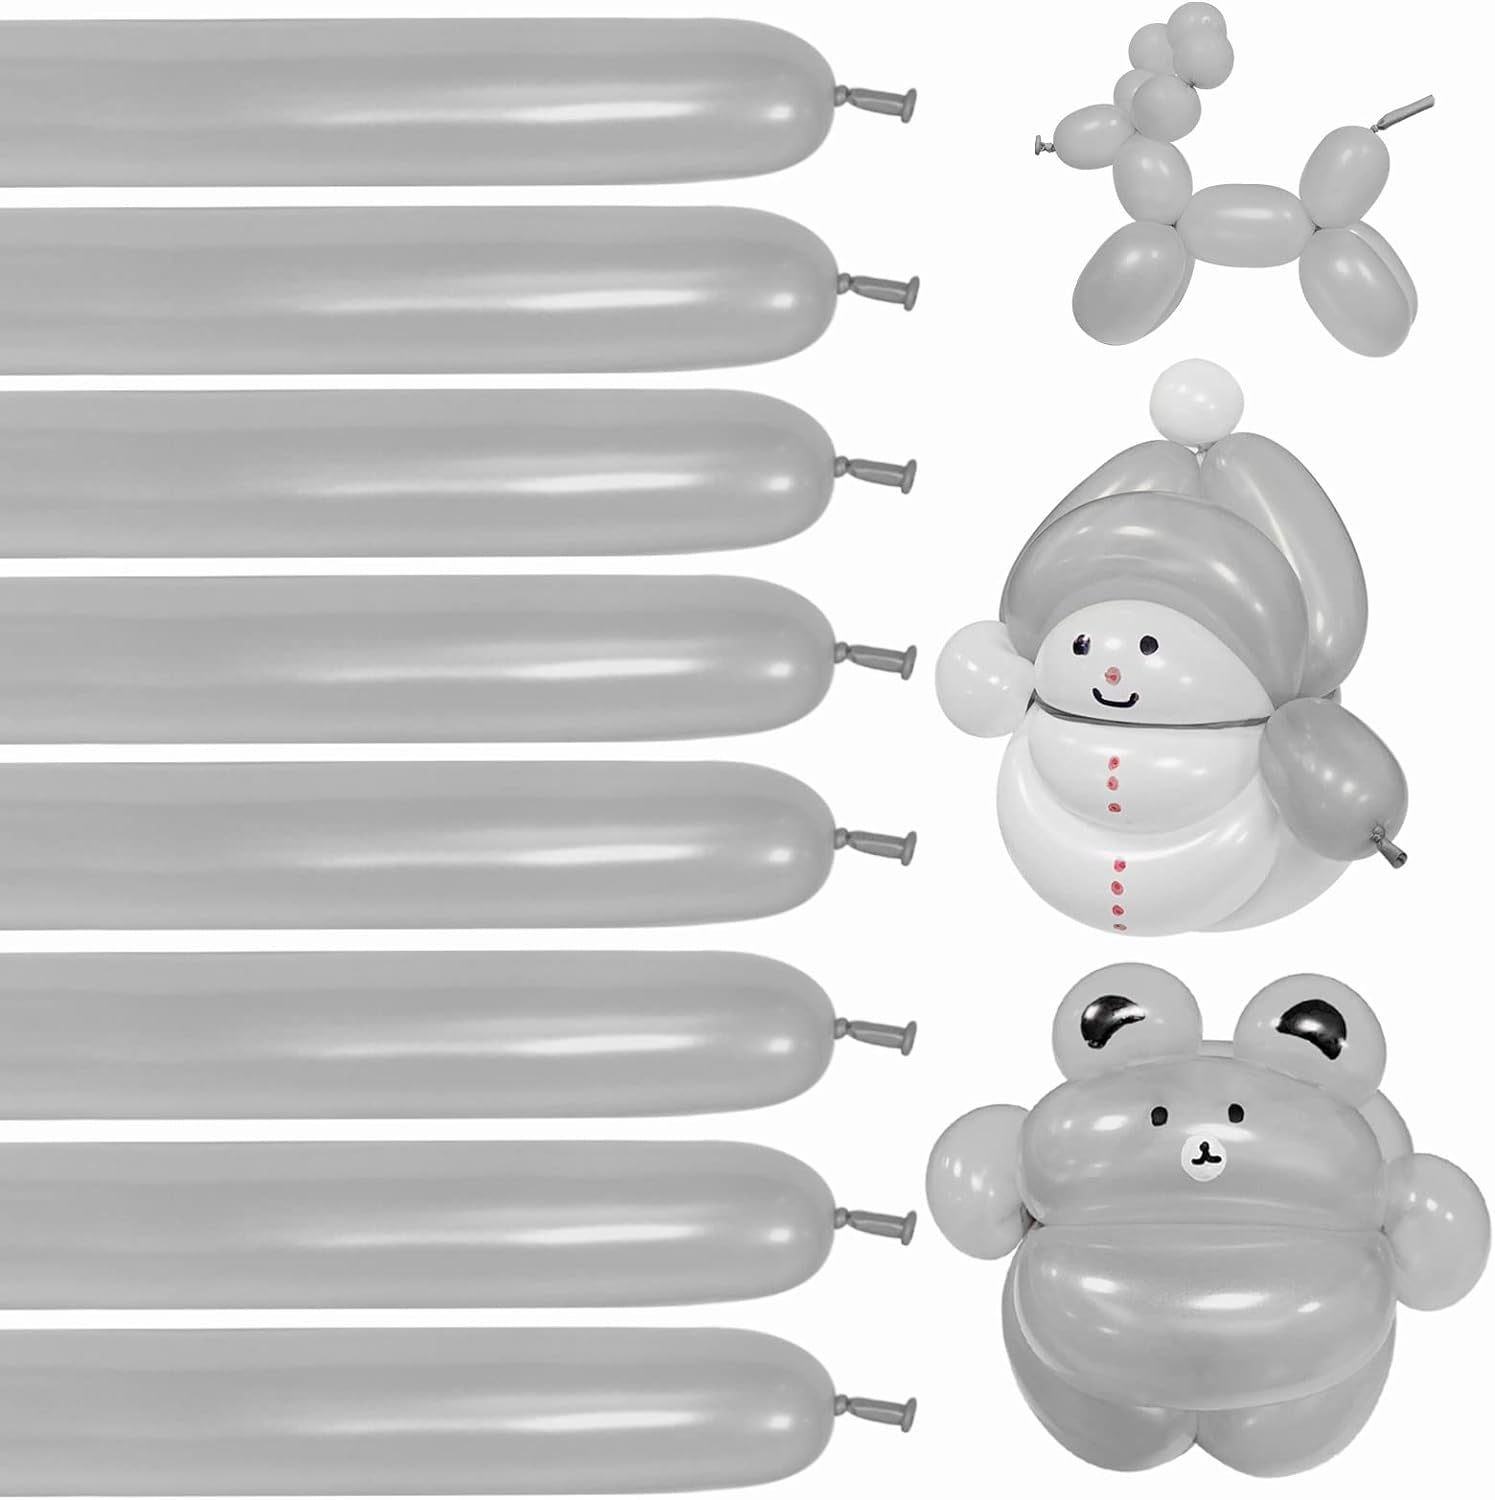 100Pcs Clear 260 Balloons Clear Long Skinny Latex Balloons for Animal Balloons, Premium Quality Balloons for Beginners Balloons Making Kid'S Carnivals Party Decoartion